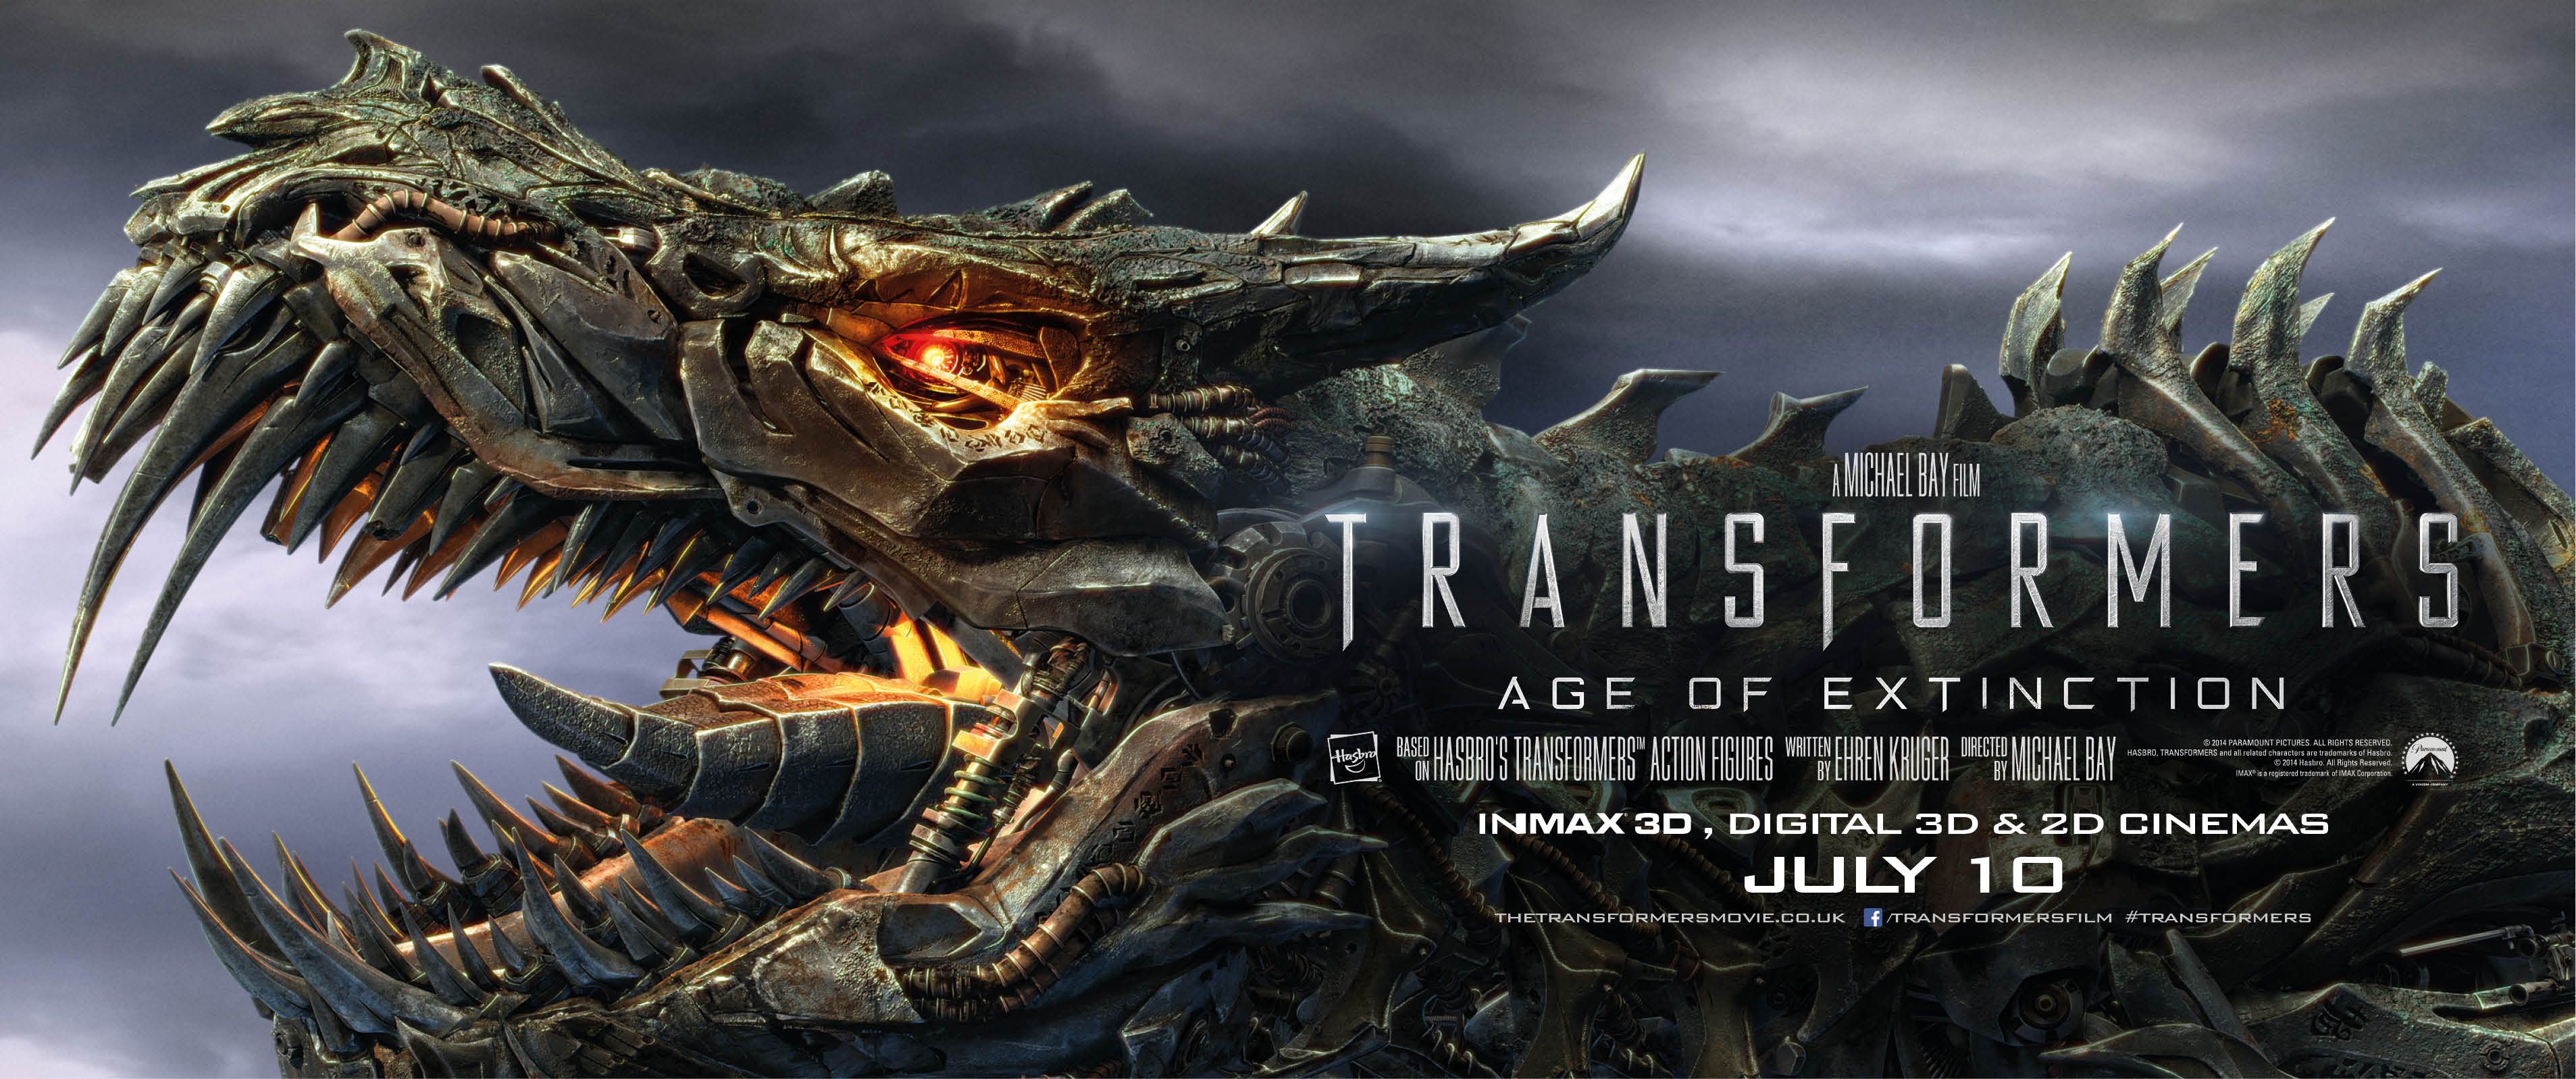 The International Grimlock Banner for Transformers: Age of E